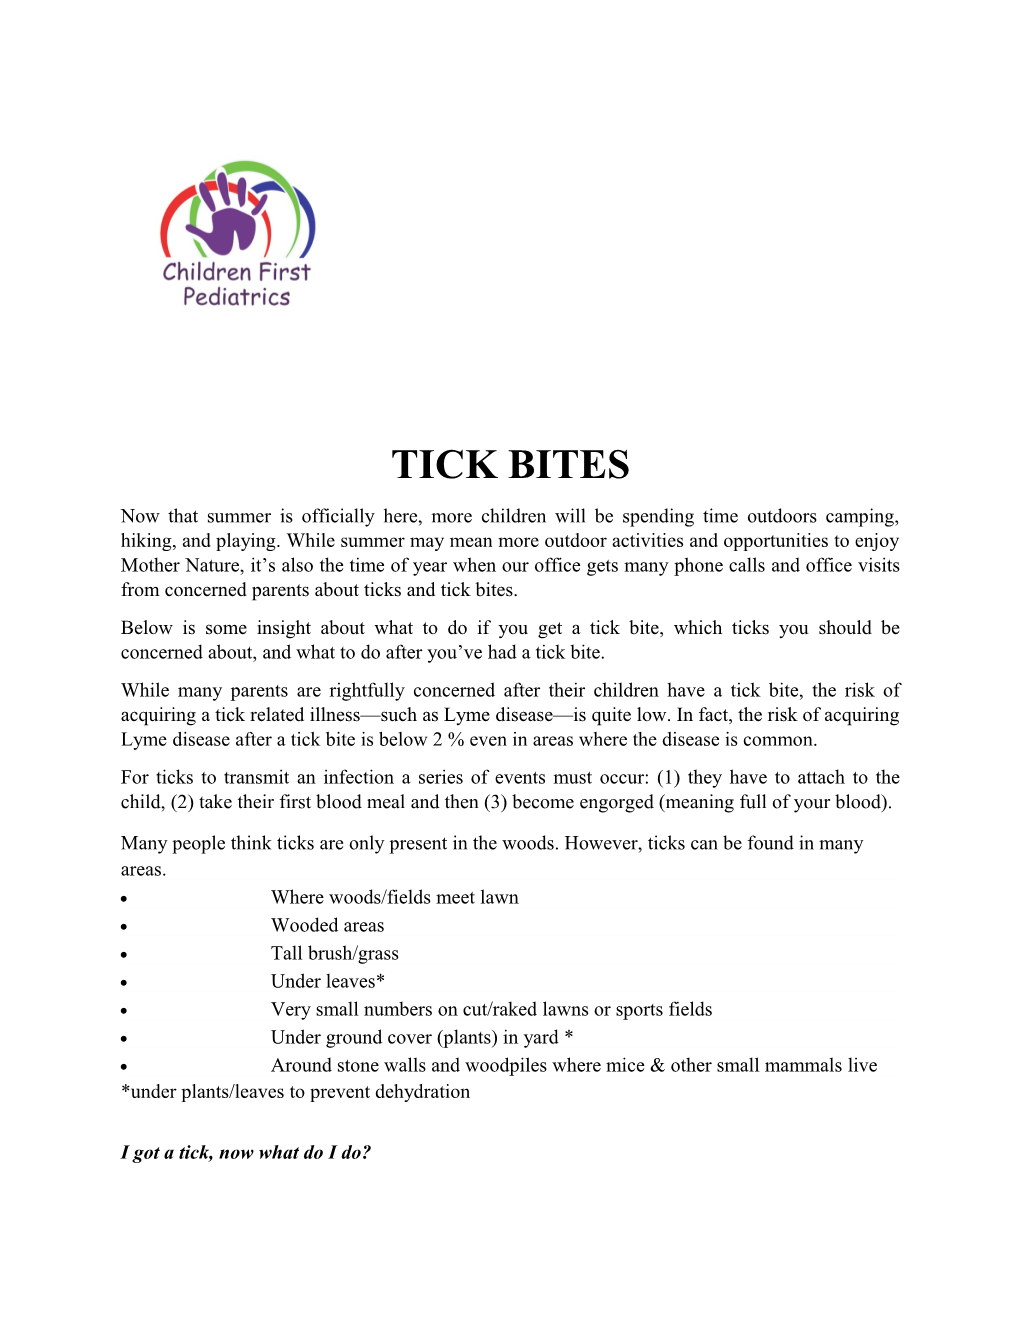 Below Is Some Insight About What to Do If You Get a Tick Bite,Which Ticks You Should Be